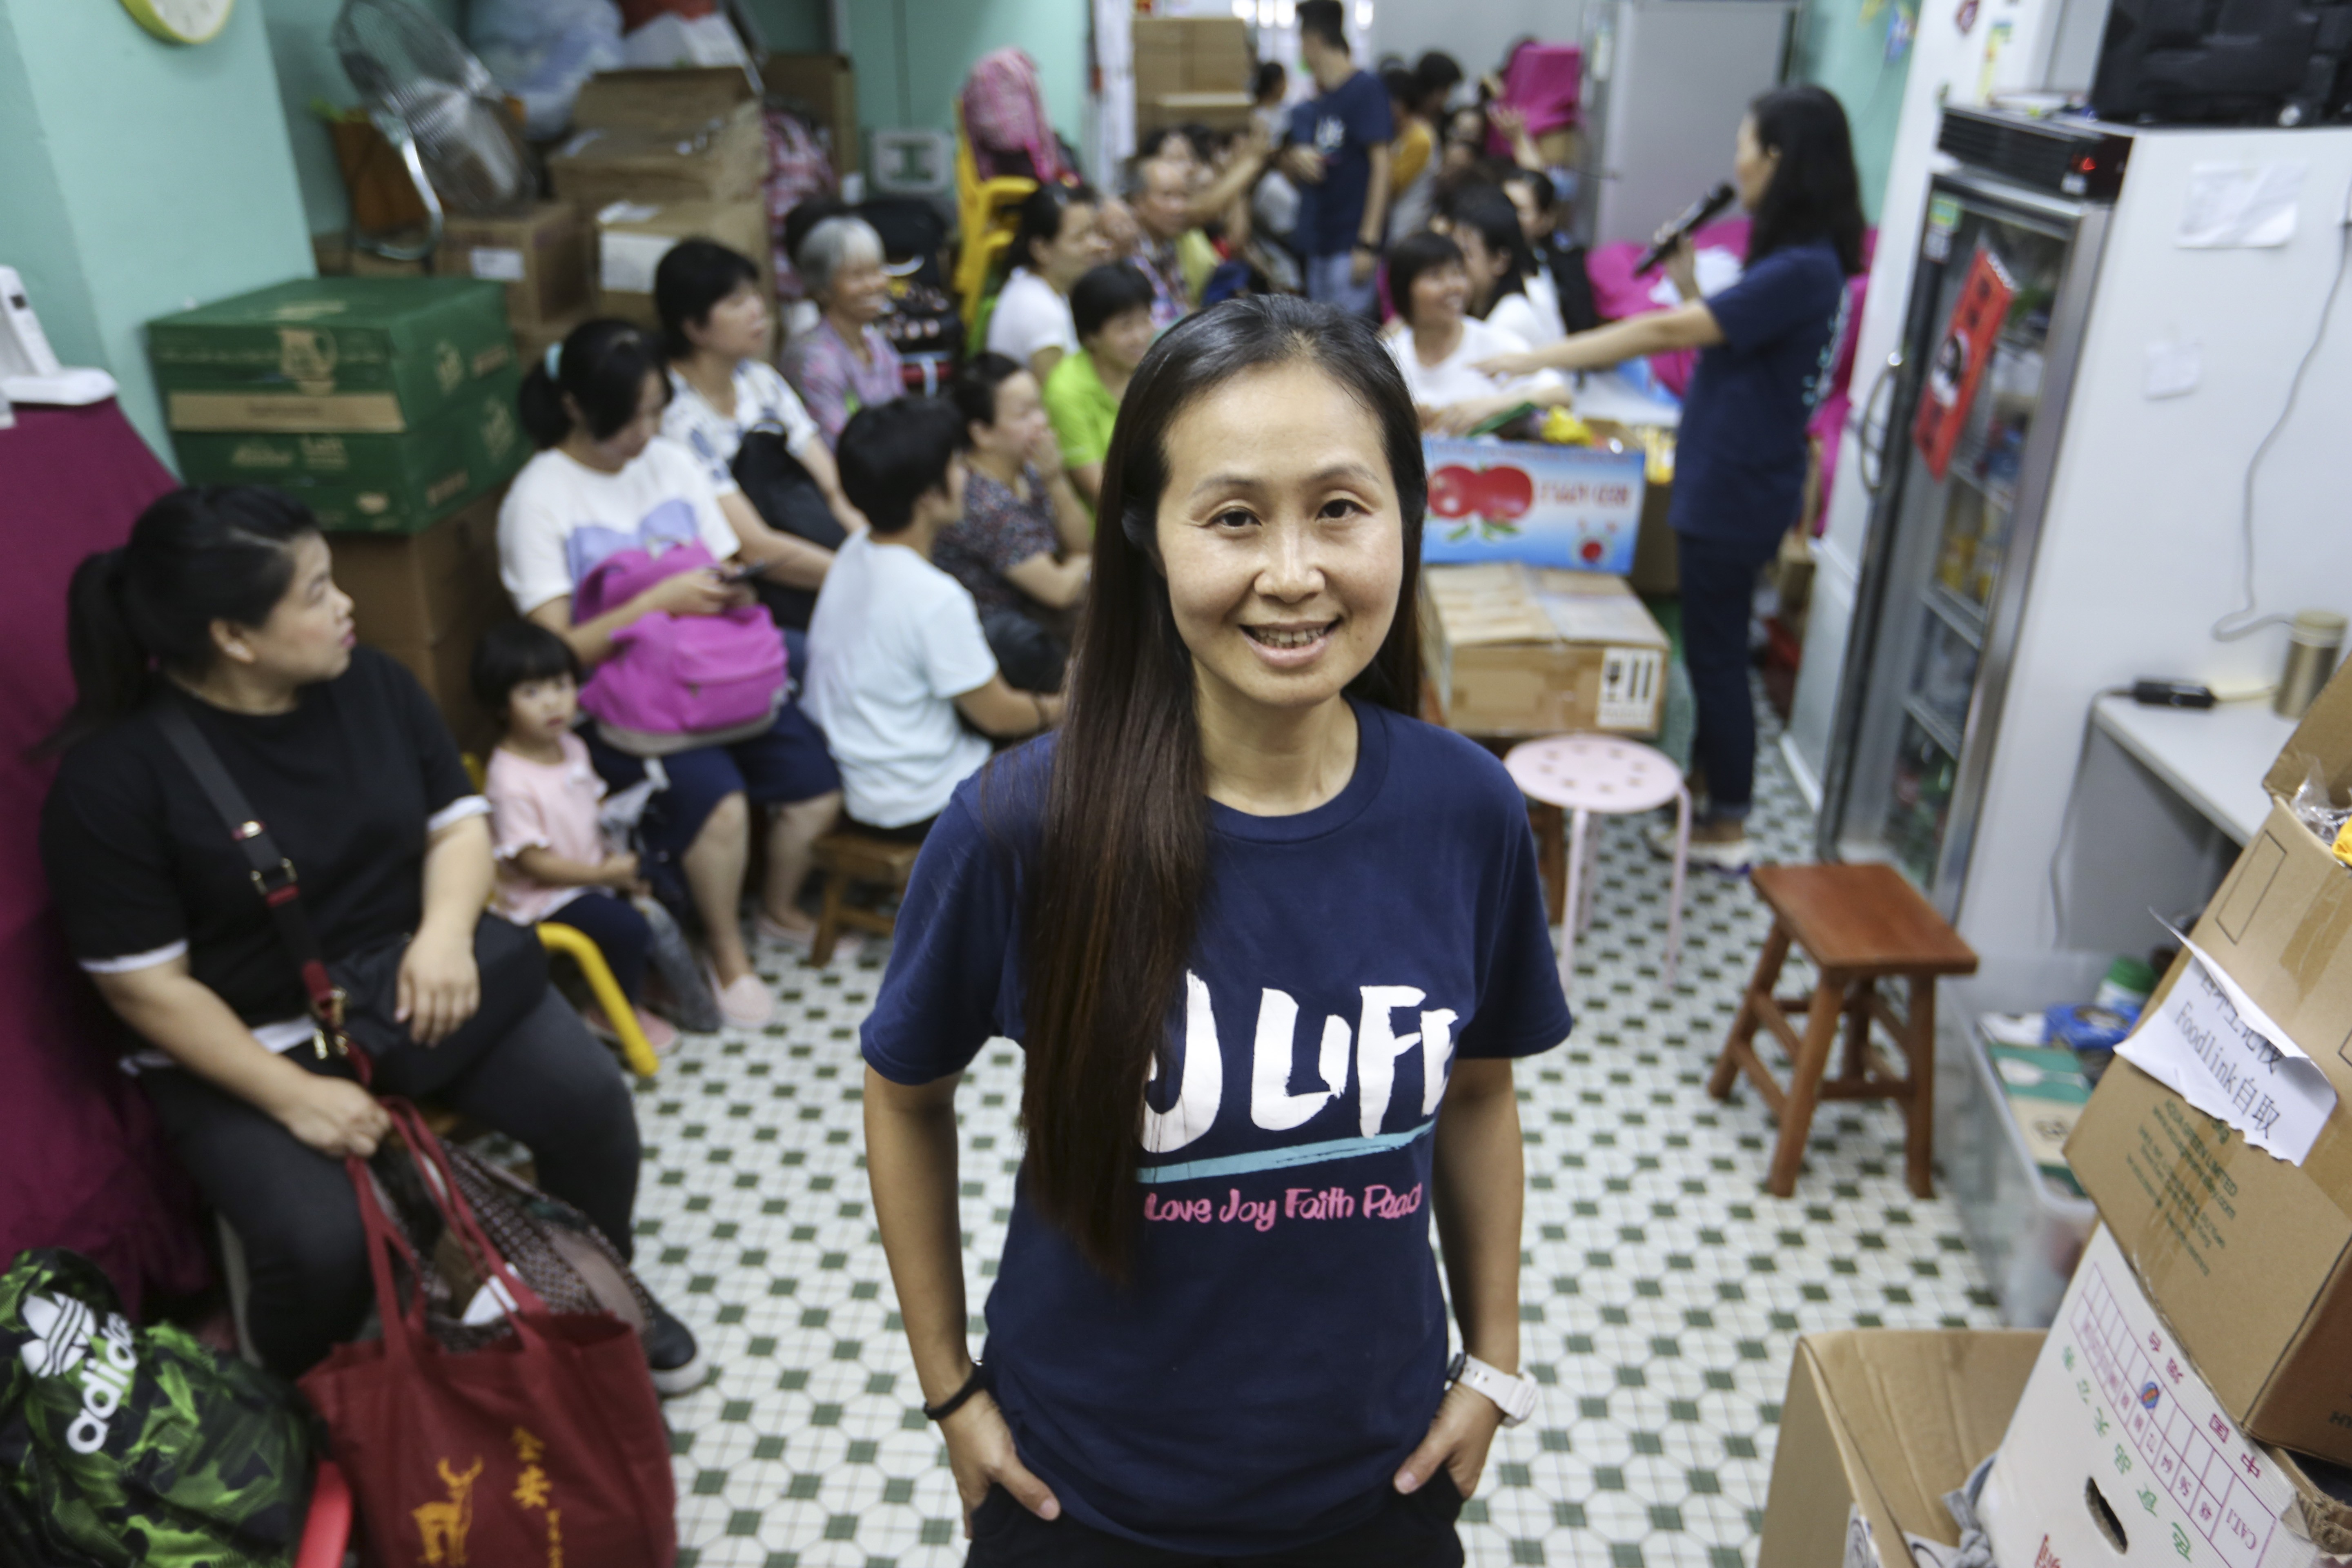 Elli Fu left a career in sales and marketing with more than HK$1 million in savings, all of which she poured into the organisationJ Life. Photo: Xiaomei Chen